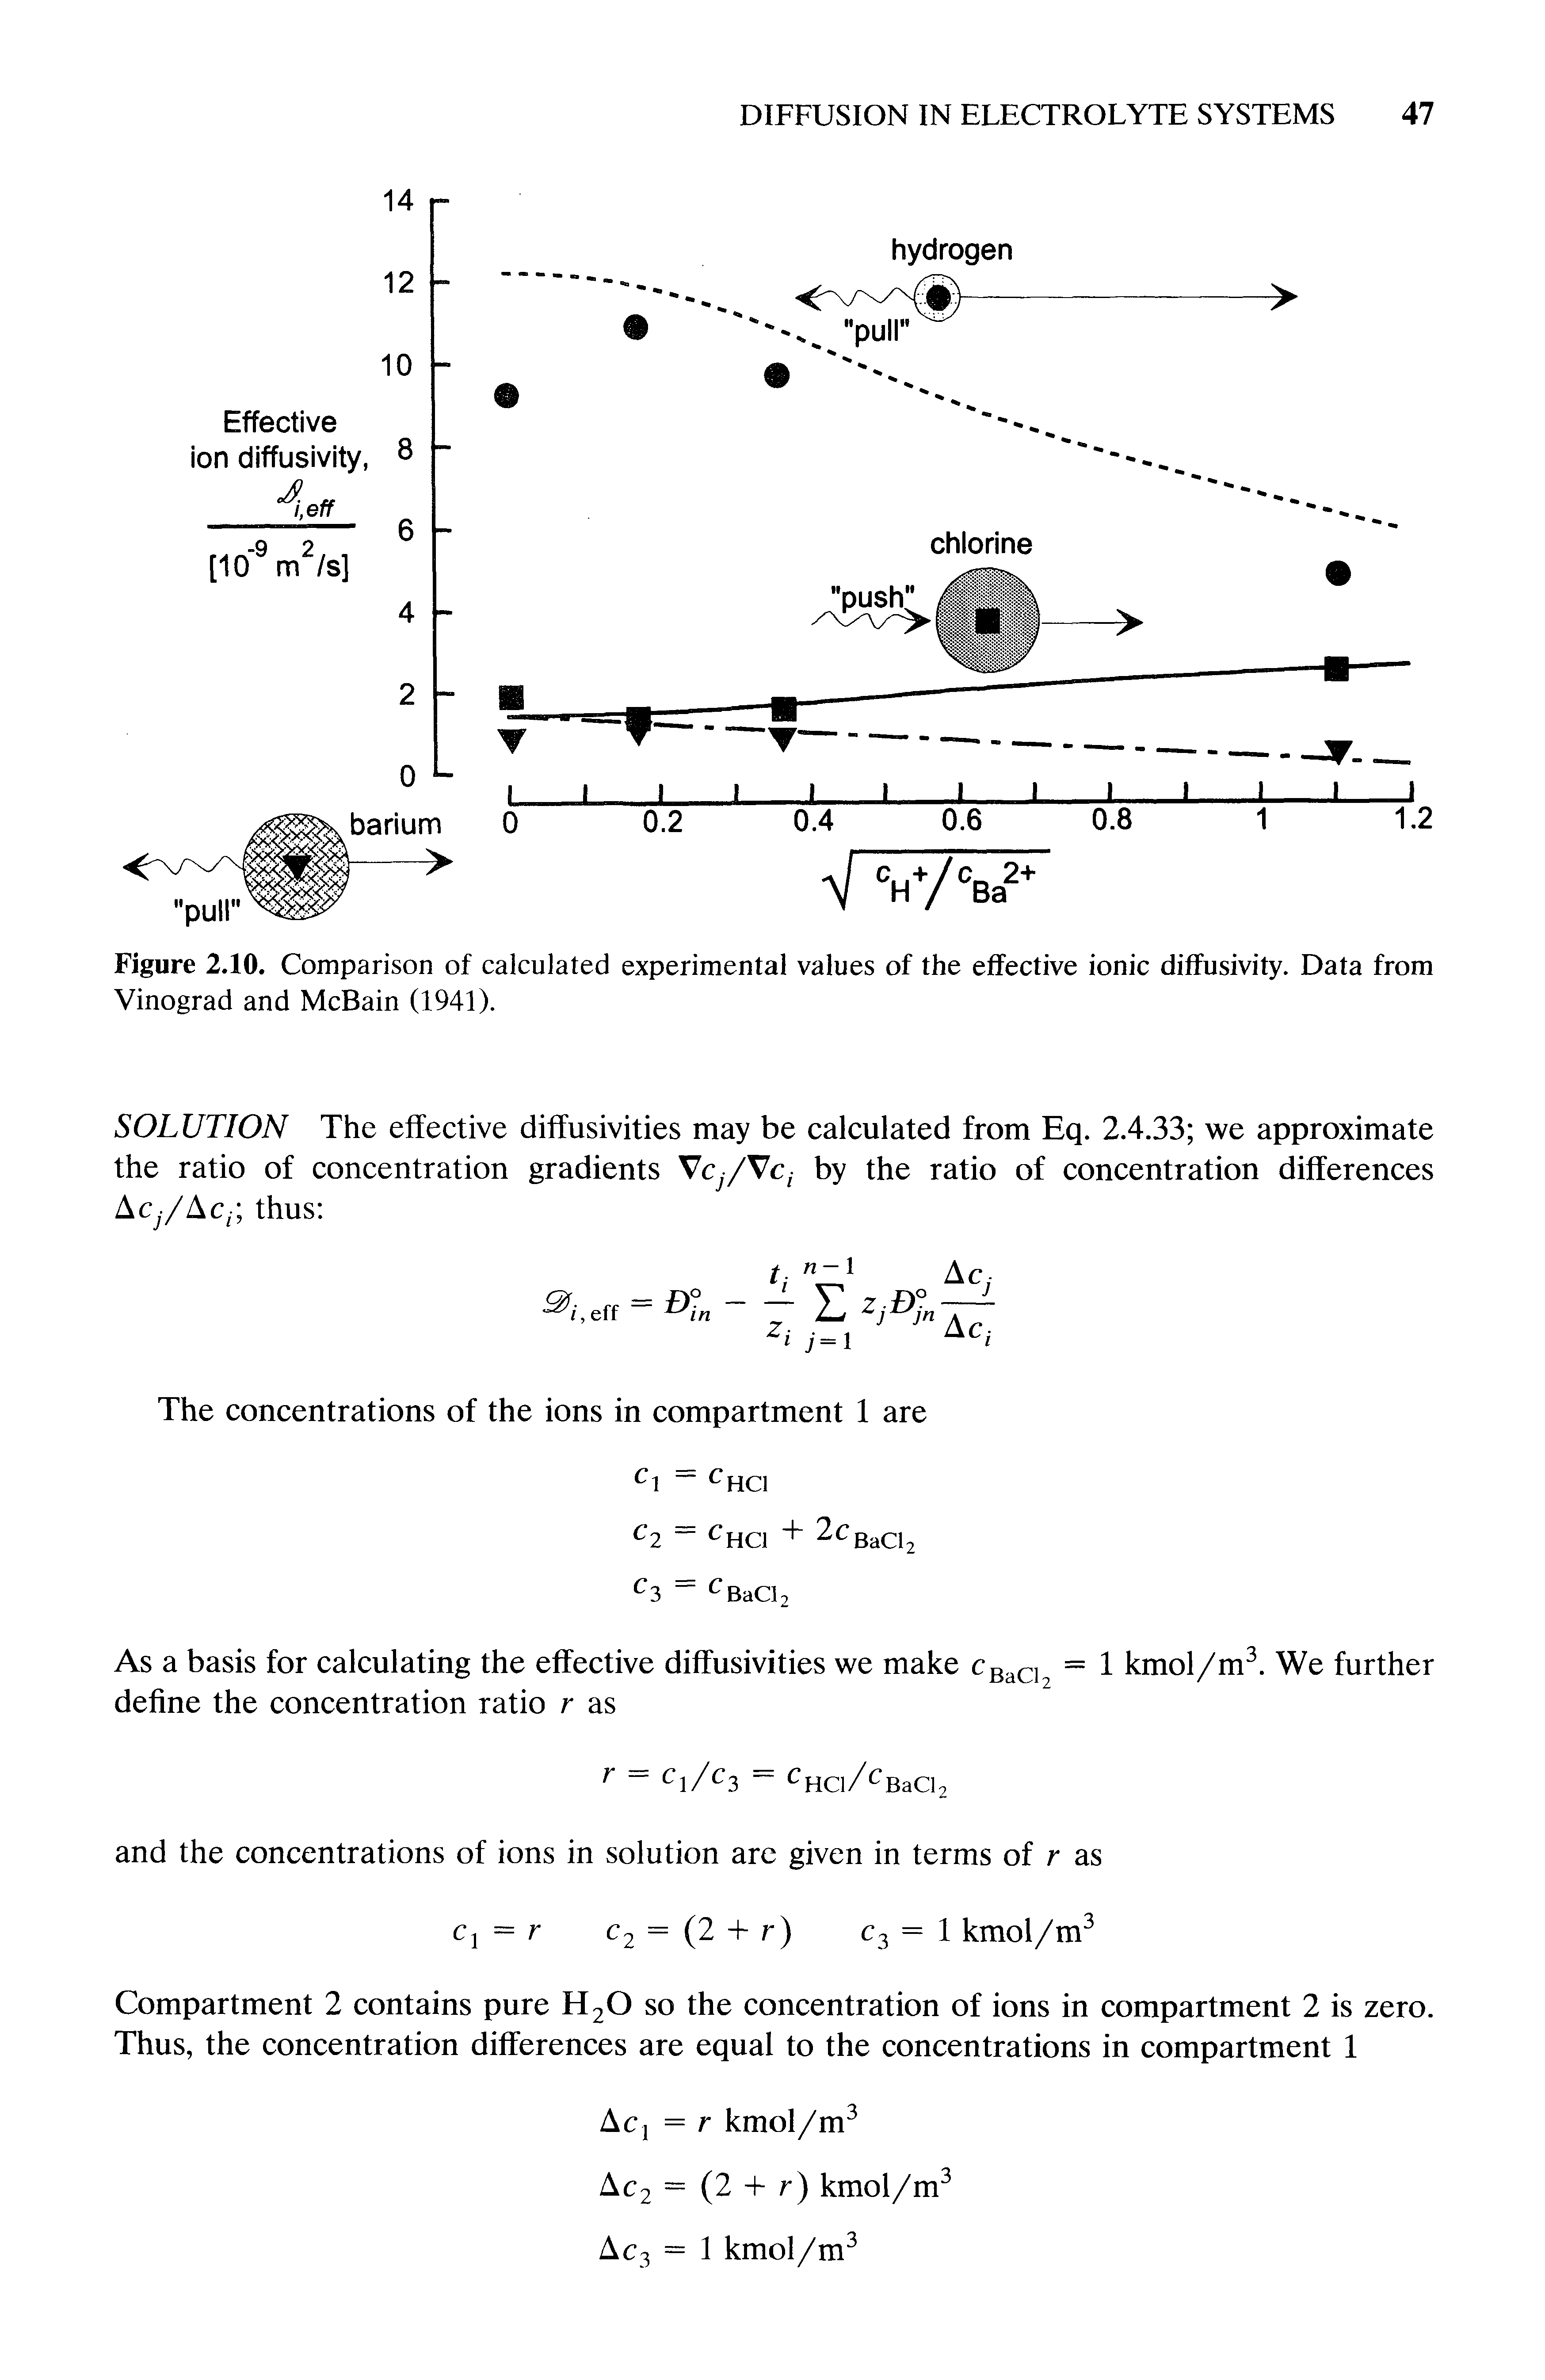 Figure 2.10. Comparison of calculated experimental values of the effective ionic diffusivity. Data from Vinograd and McBain (1941).